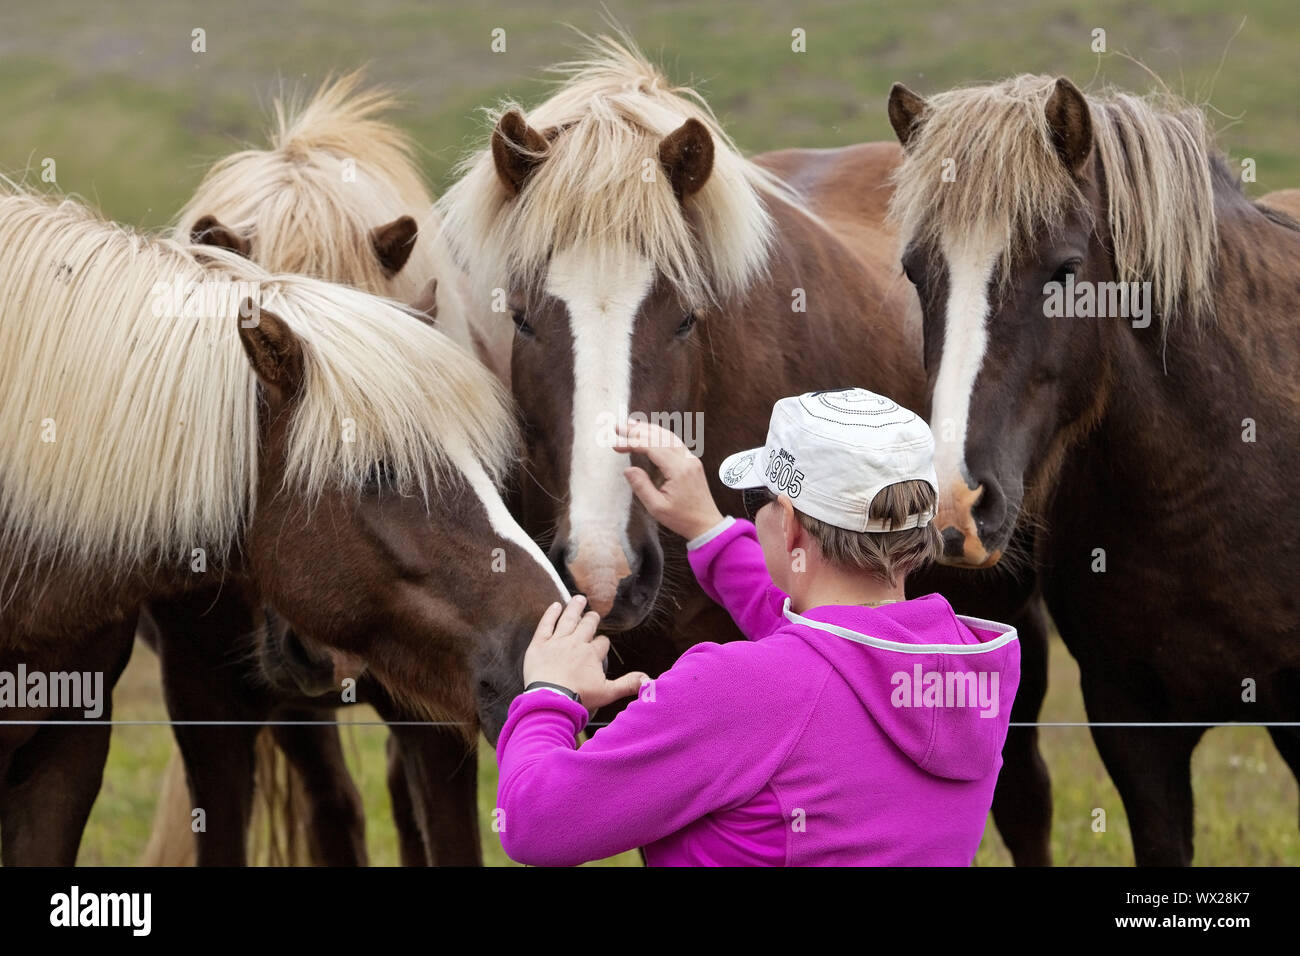 Icelandic horses (Equus ferus caballus) curiously noising at a woman at the pasture fence, Iceland Stock Photo